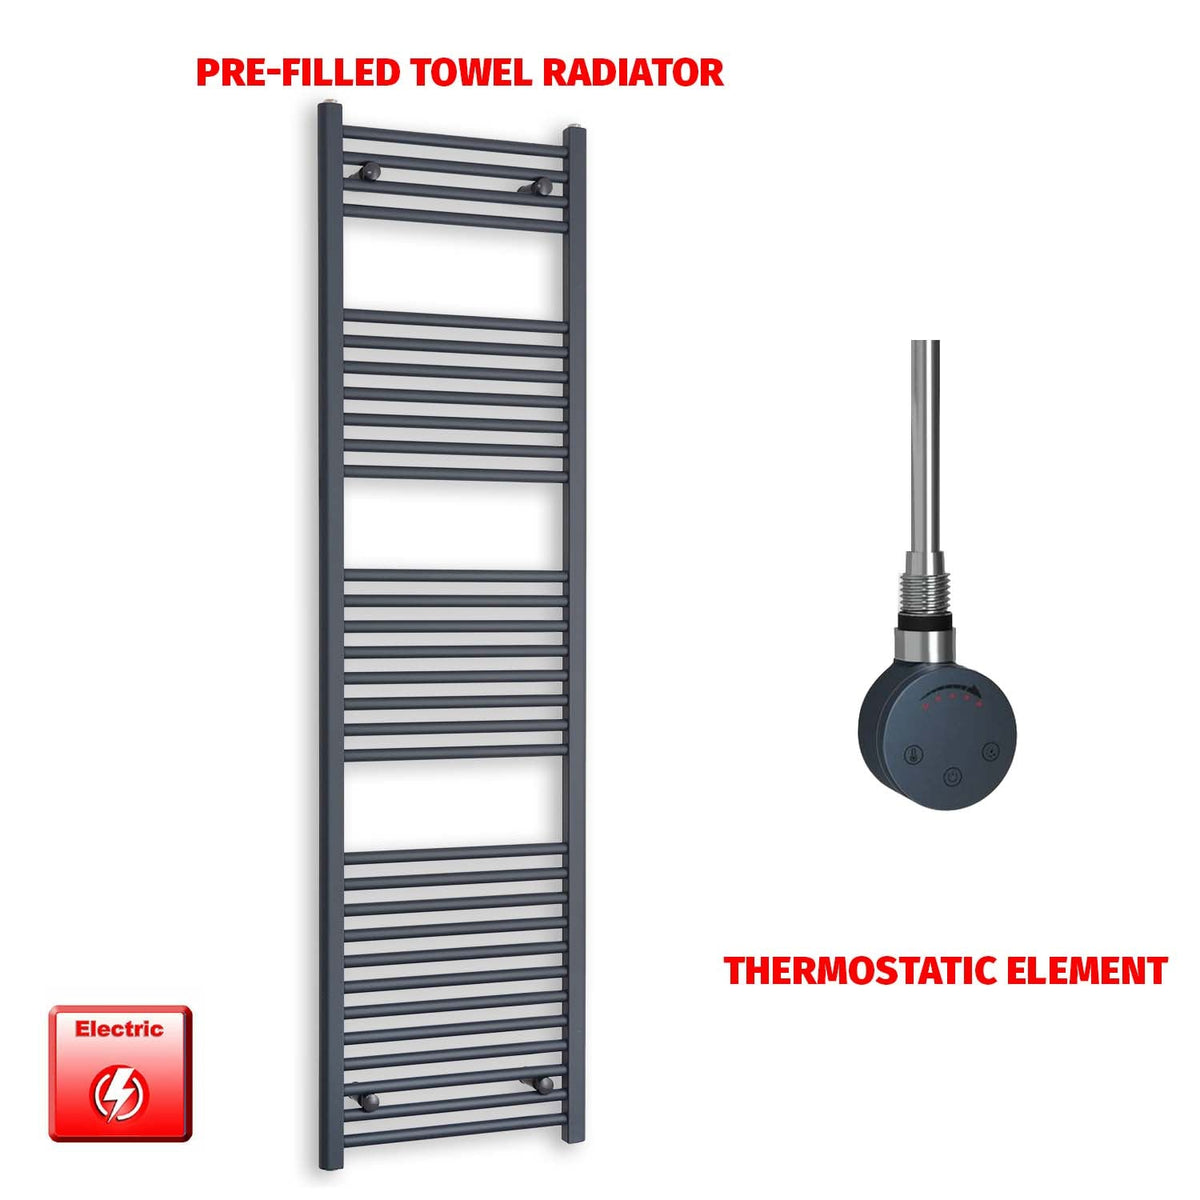 1800mm High 500mm Wide Flat Anthracite Pre-Filled Electric Heated Towel Radiator SMR Thermostatic element no timer